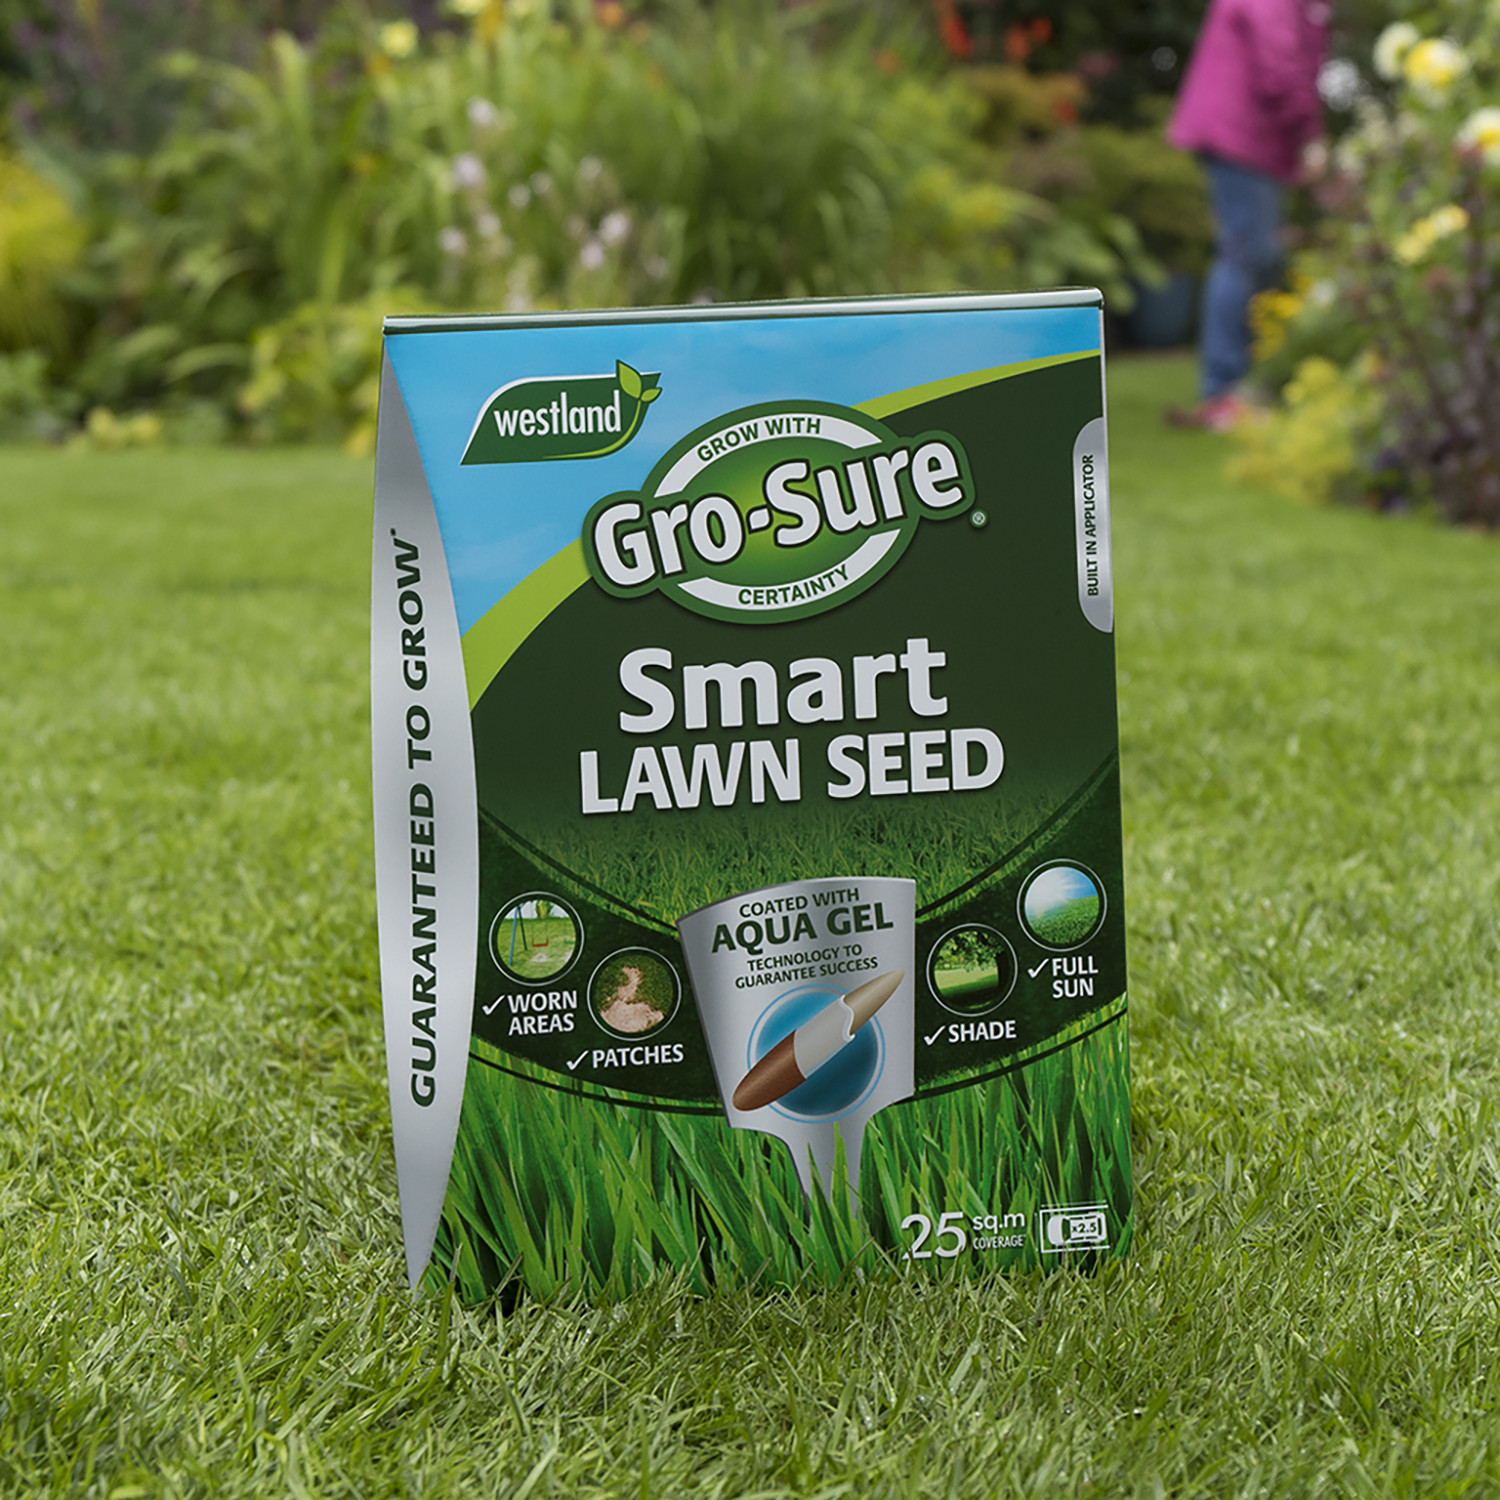 Gro-Sure Smart Lawn Seed - 25m2 Image 2